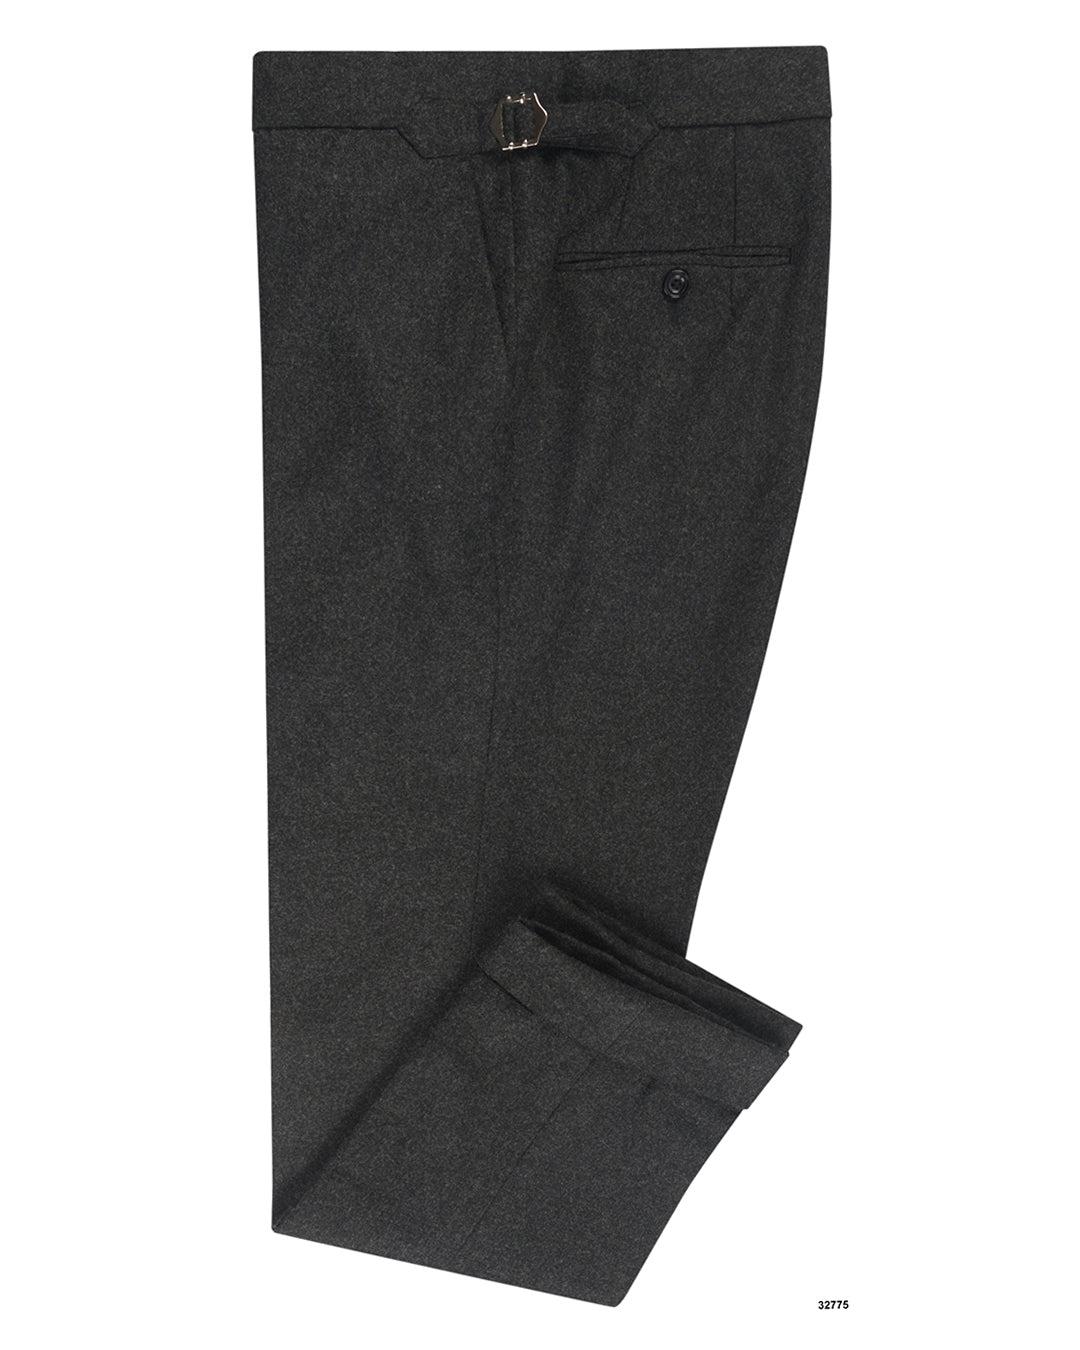 Minnis Flannel: Charcoal Pant